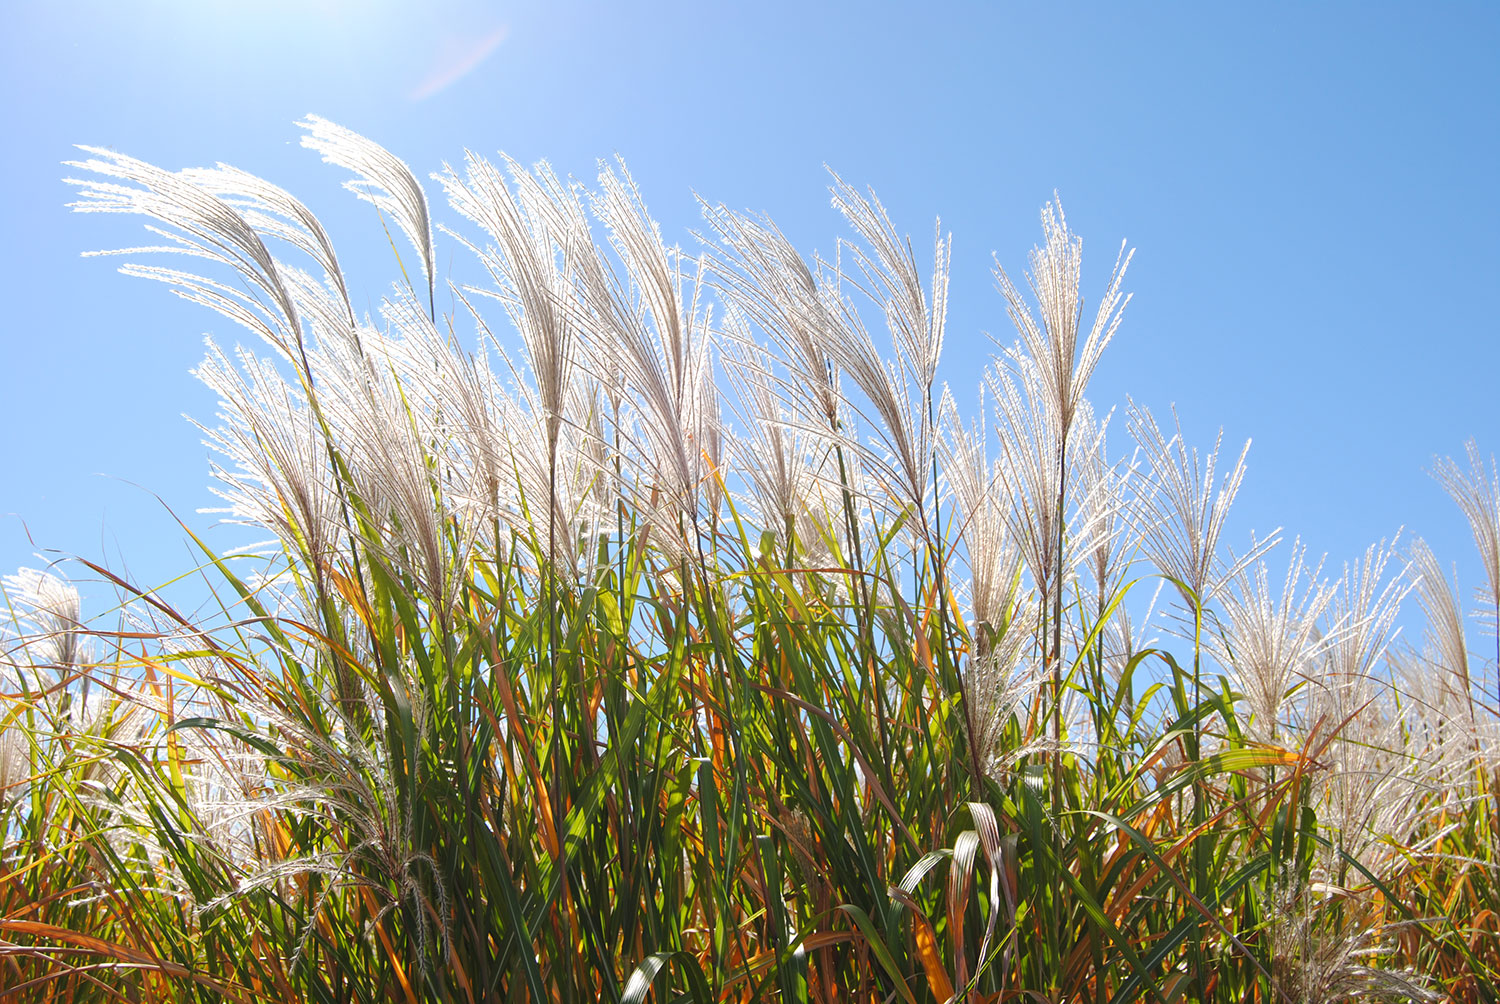 Miscanthus offers a sustainable pet food fiber source 